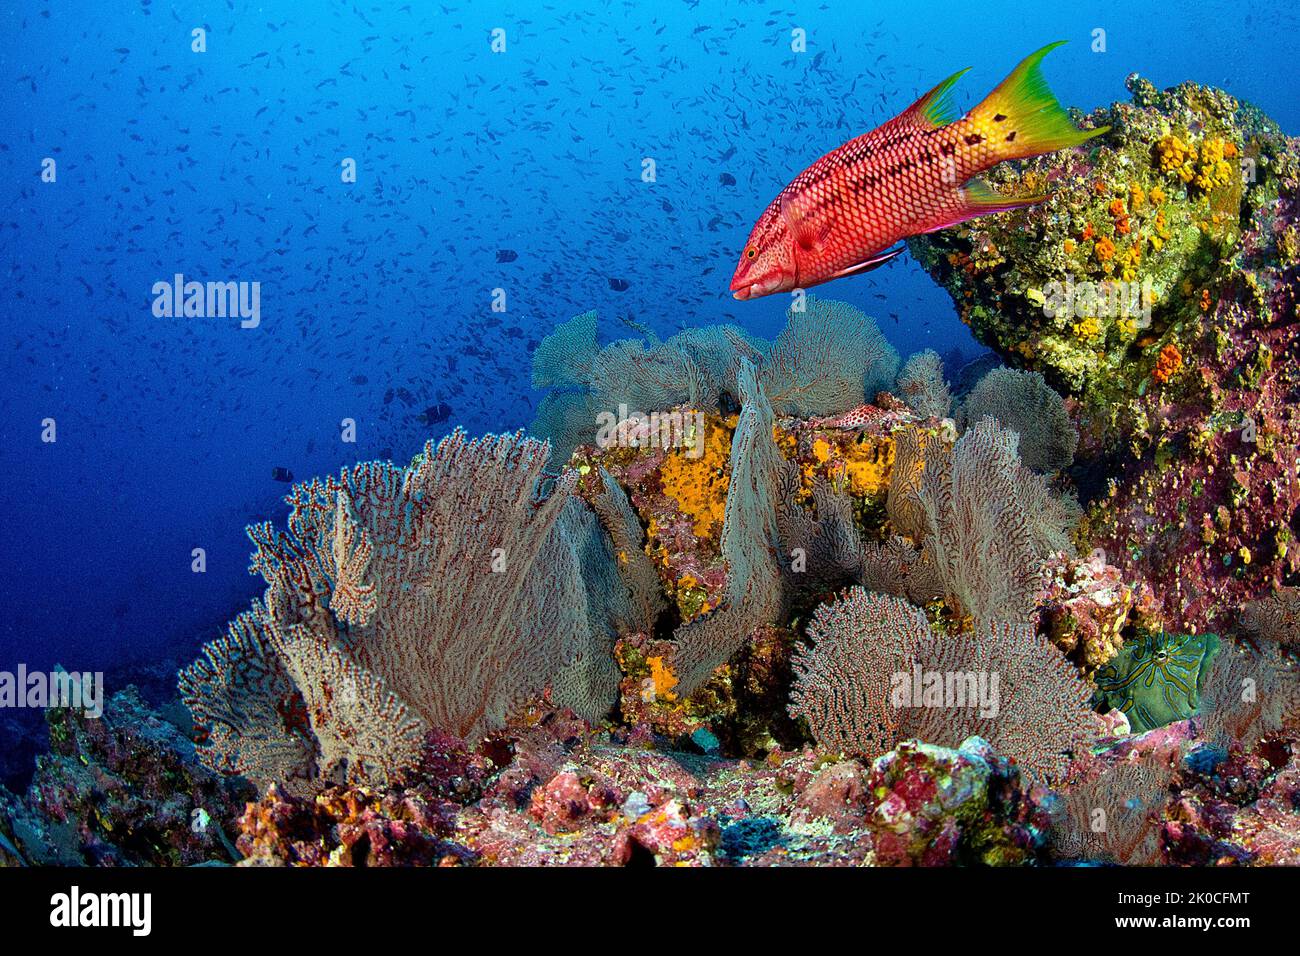 Mexican Hogfish or Streamer Hogfish (Bodianus diplotaenia) at a coral reef, Malpelo island, UNESCO World Heritage site, Colombia Stock Photo